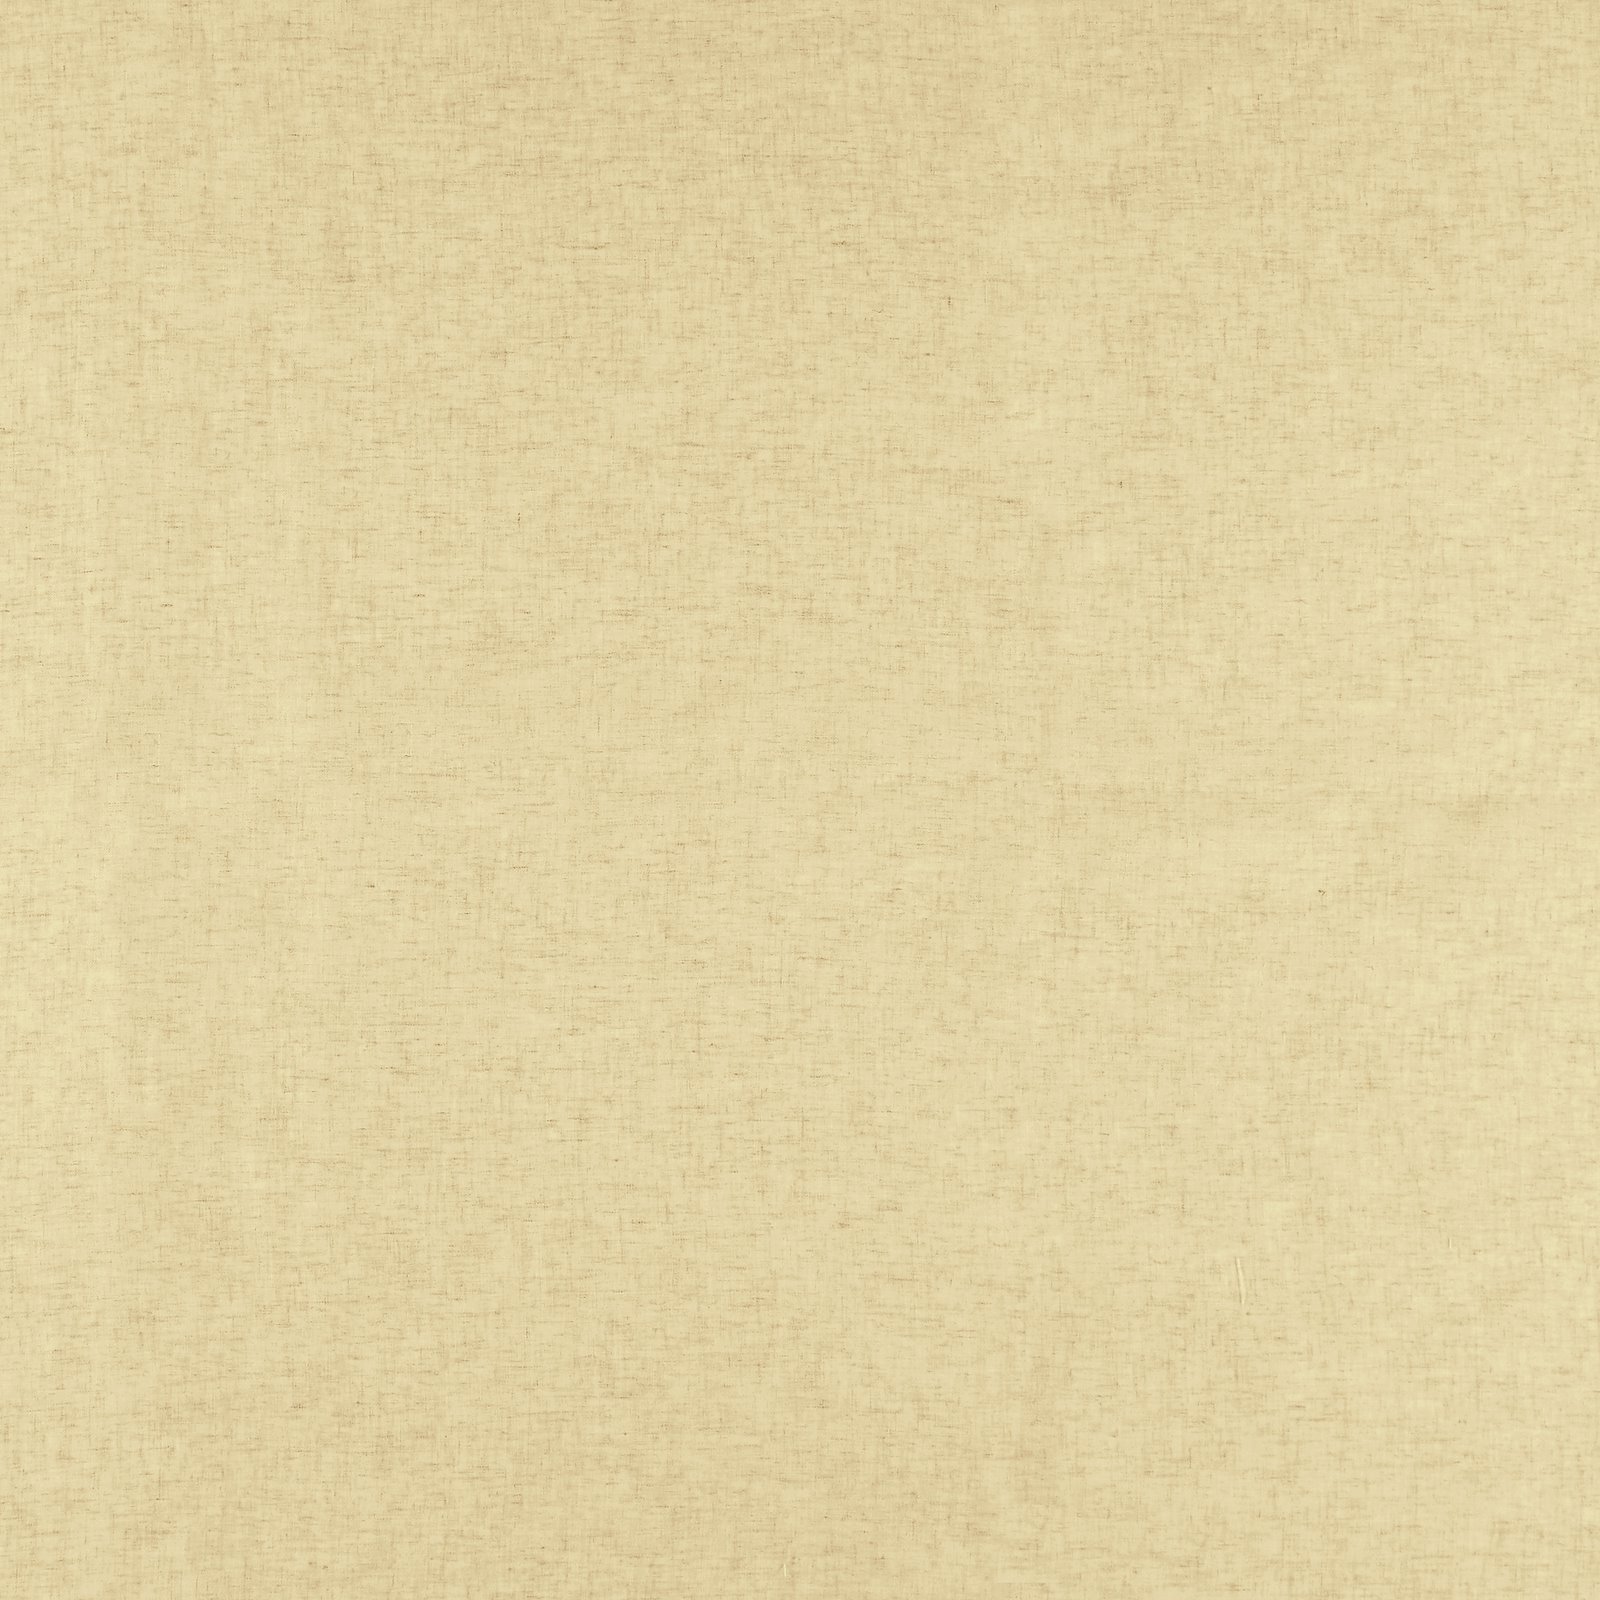 Voile sand polyester/linen blend 835173_pack_solid